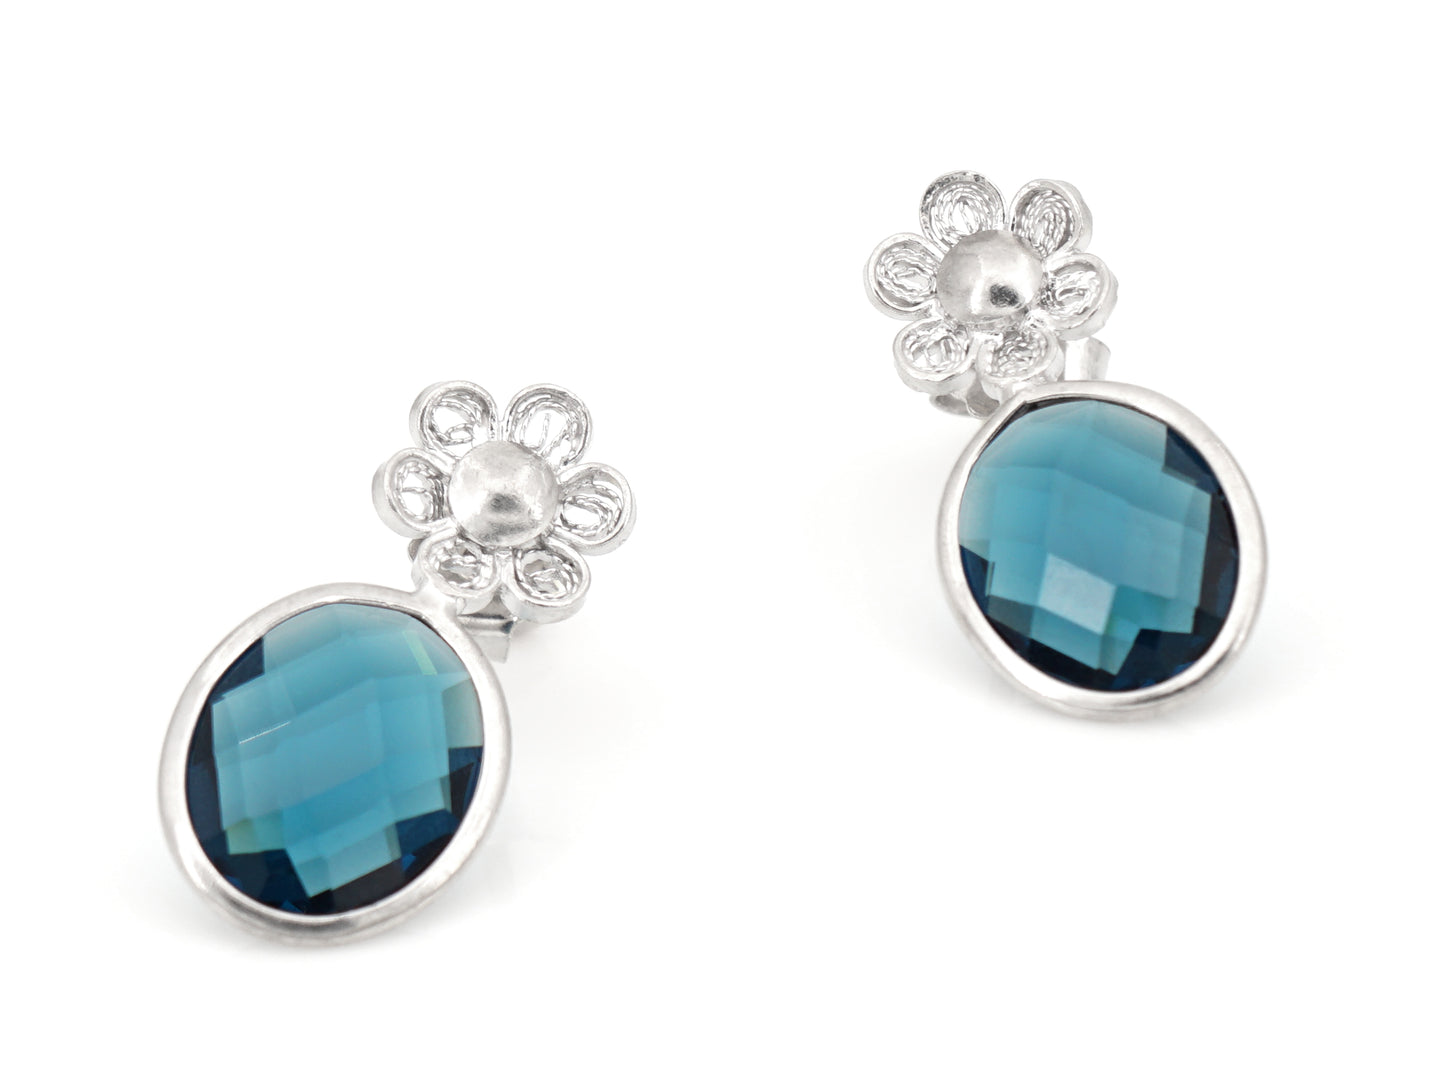 Flower and Blue Stone Earrings, Portuguese Filigree, 925 Sterling Silver